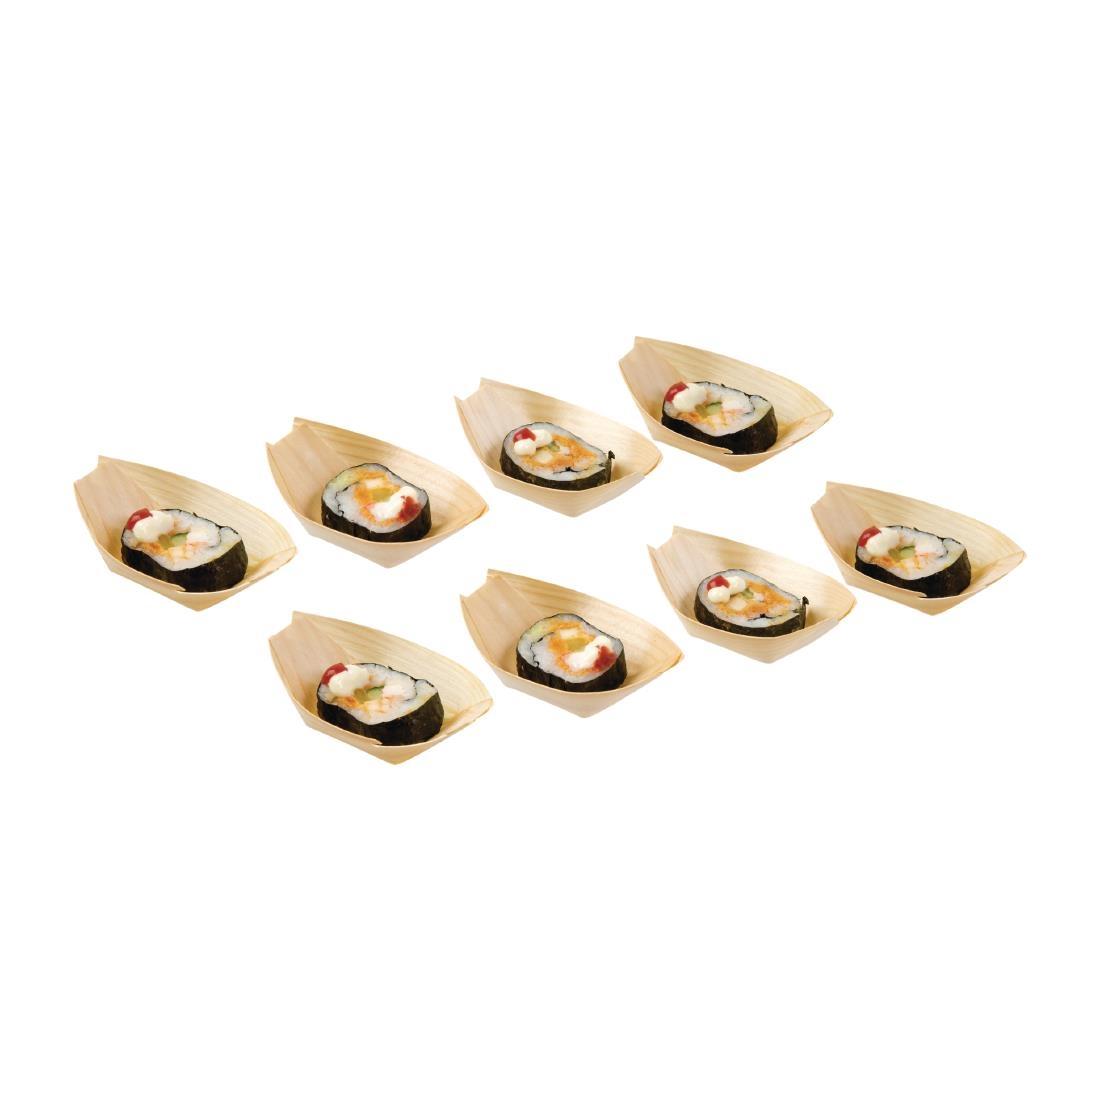 Fiesta Compostable Wooden Sushi Boats Small 80mm (Pack of 100) - DK383  - 5